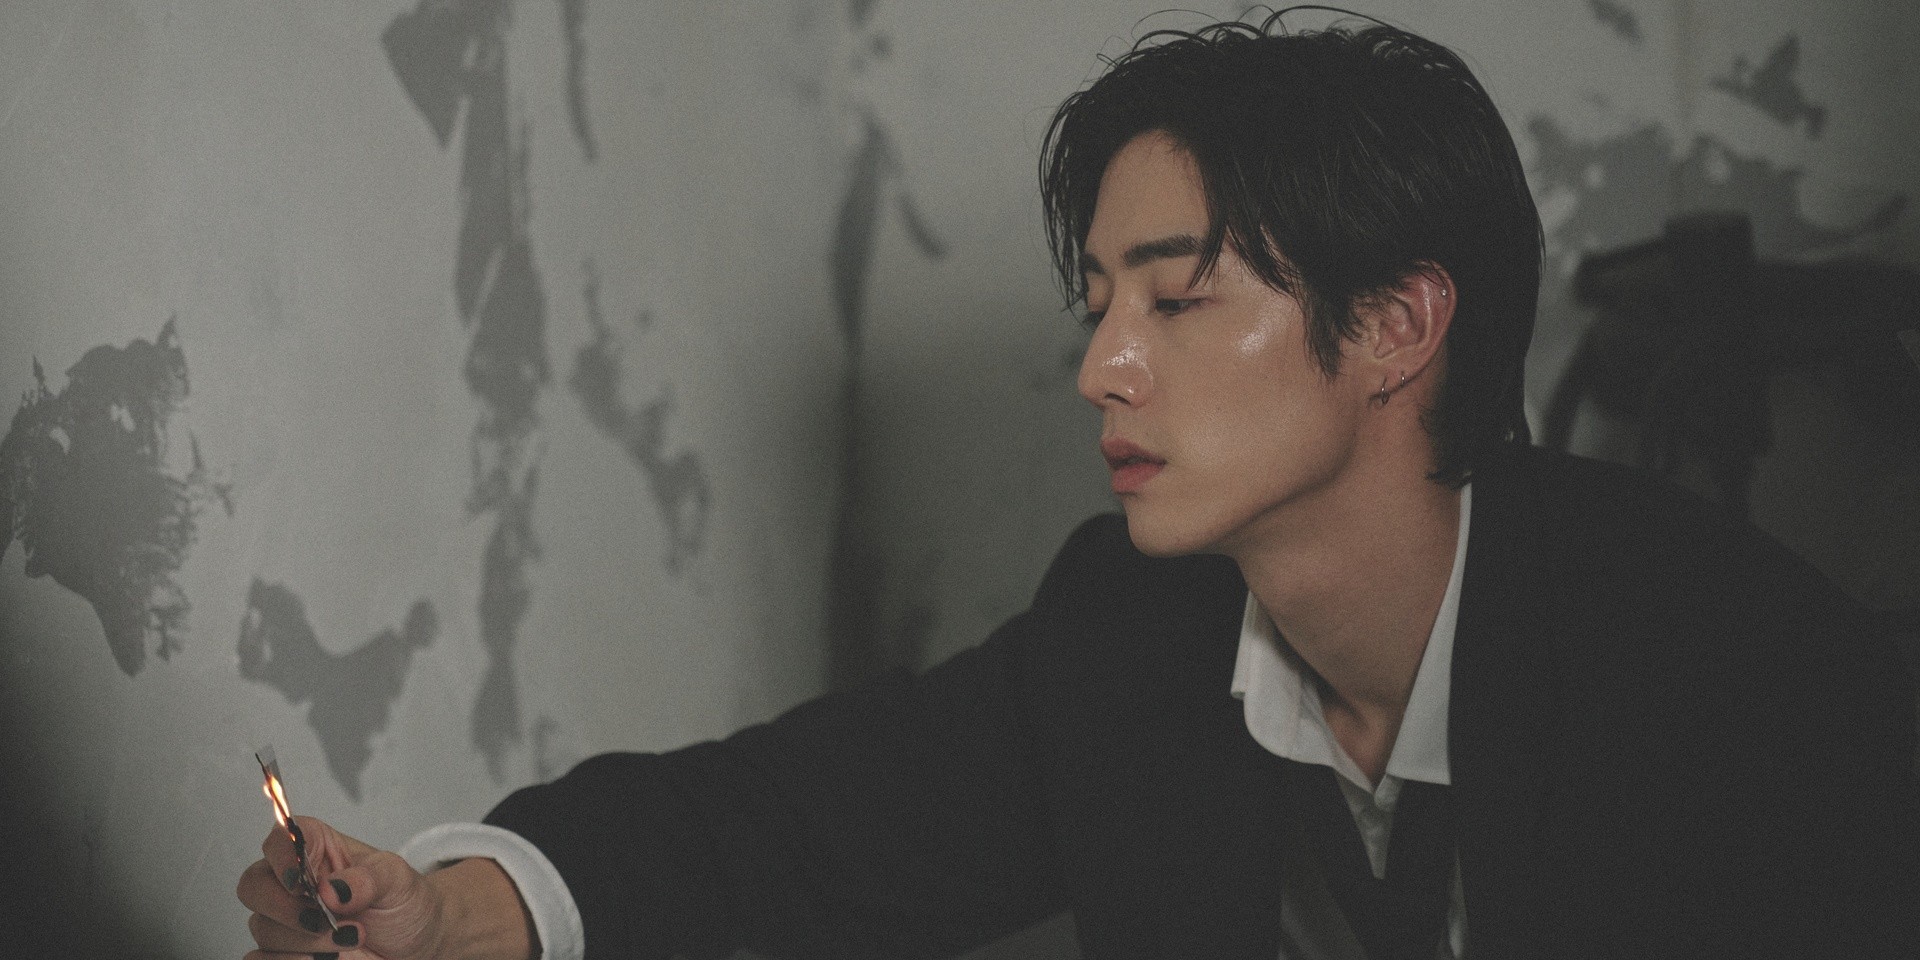 Mark Tuan announces new single 'Carry Me Out' this March